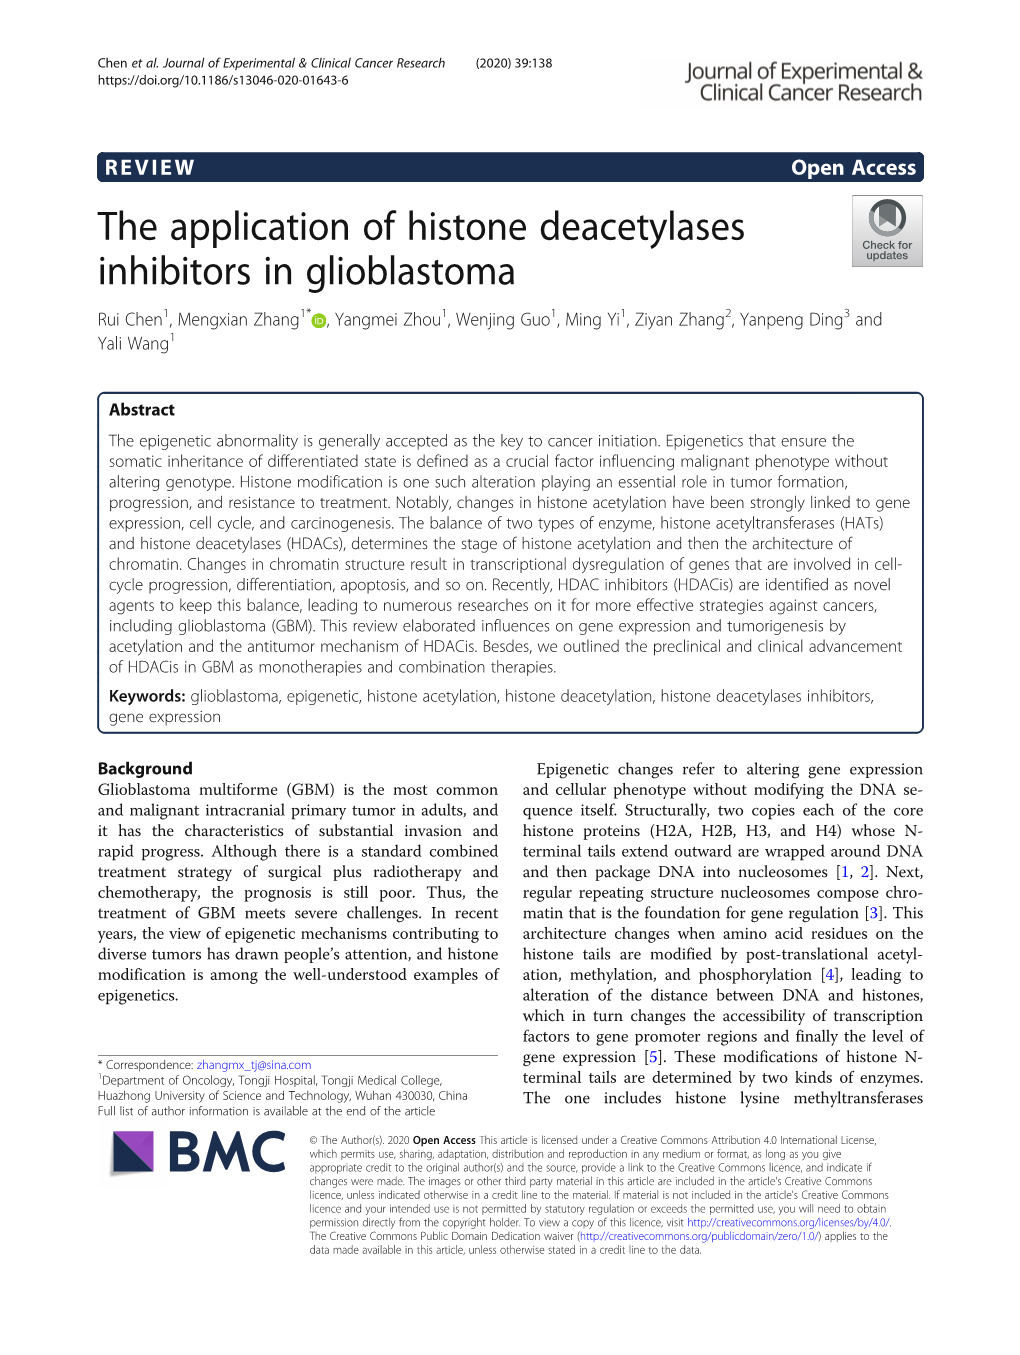 The Application of Histone Deacetylases Inhibitors In